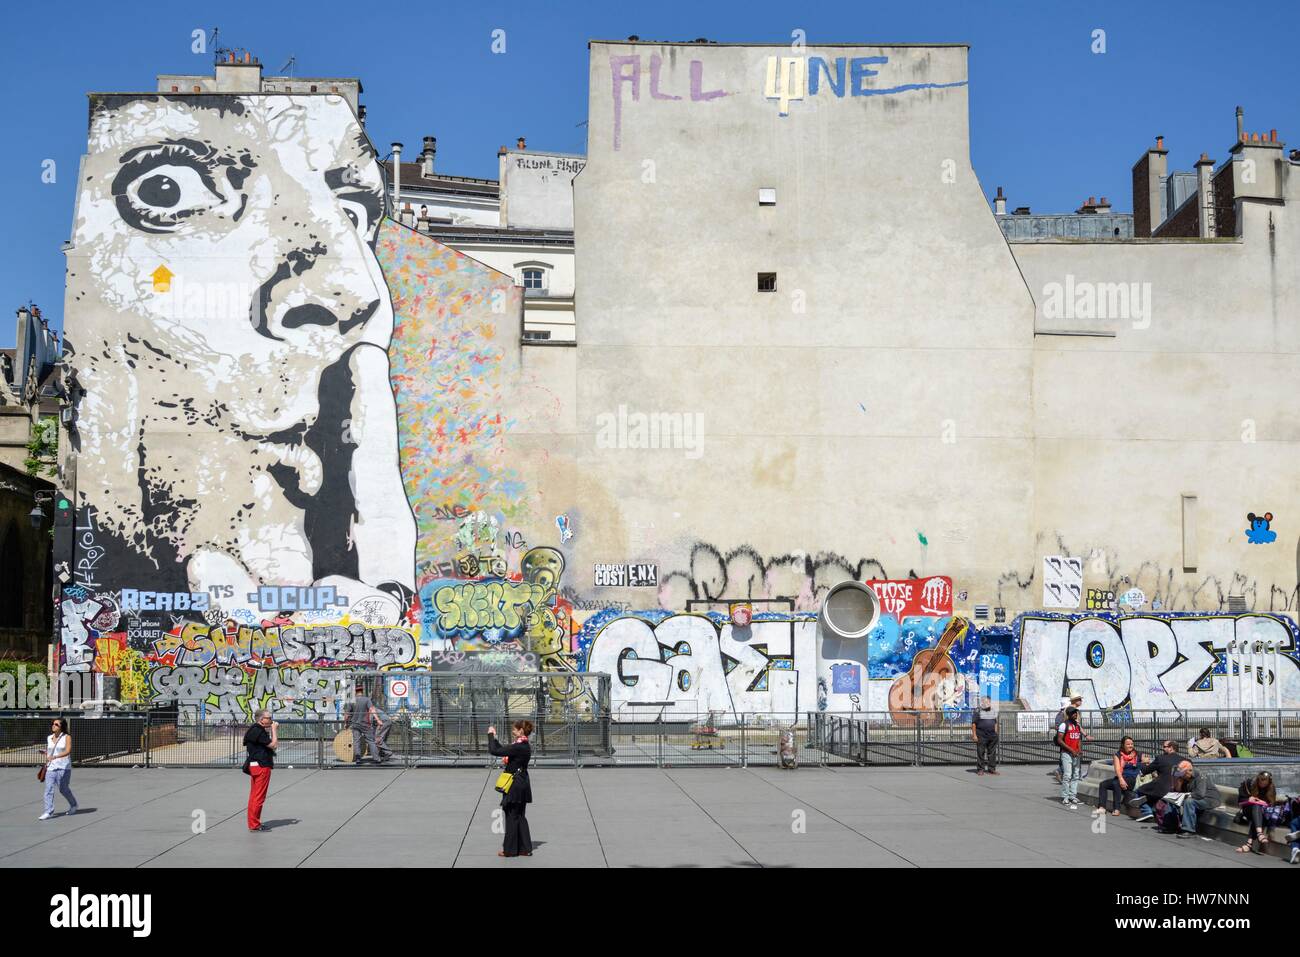 France, Paris, Place Igor Stravinsky, go and come from walkers in front of a wall painted with a fresco of Jef Aerosol Stock Photo